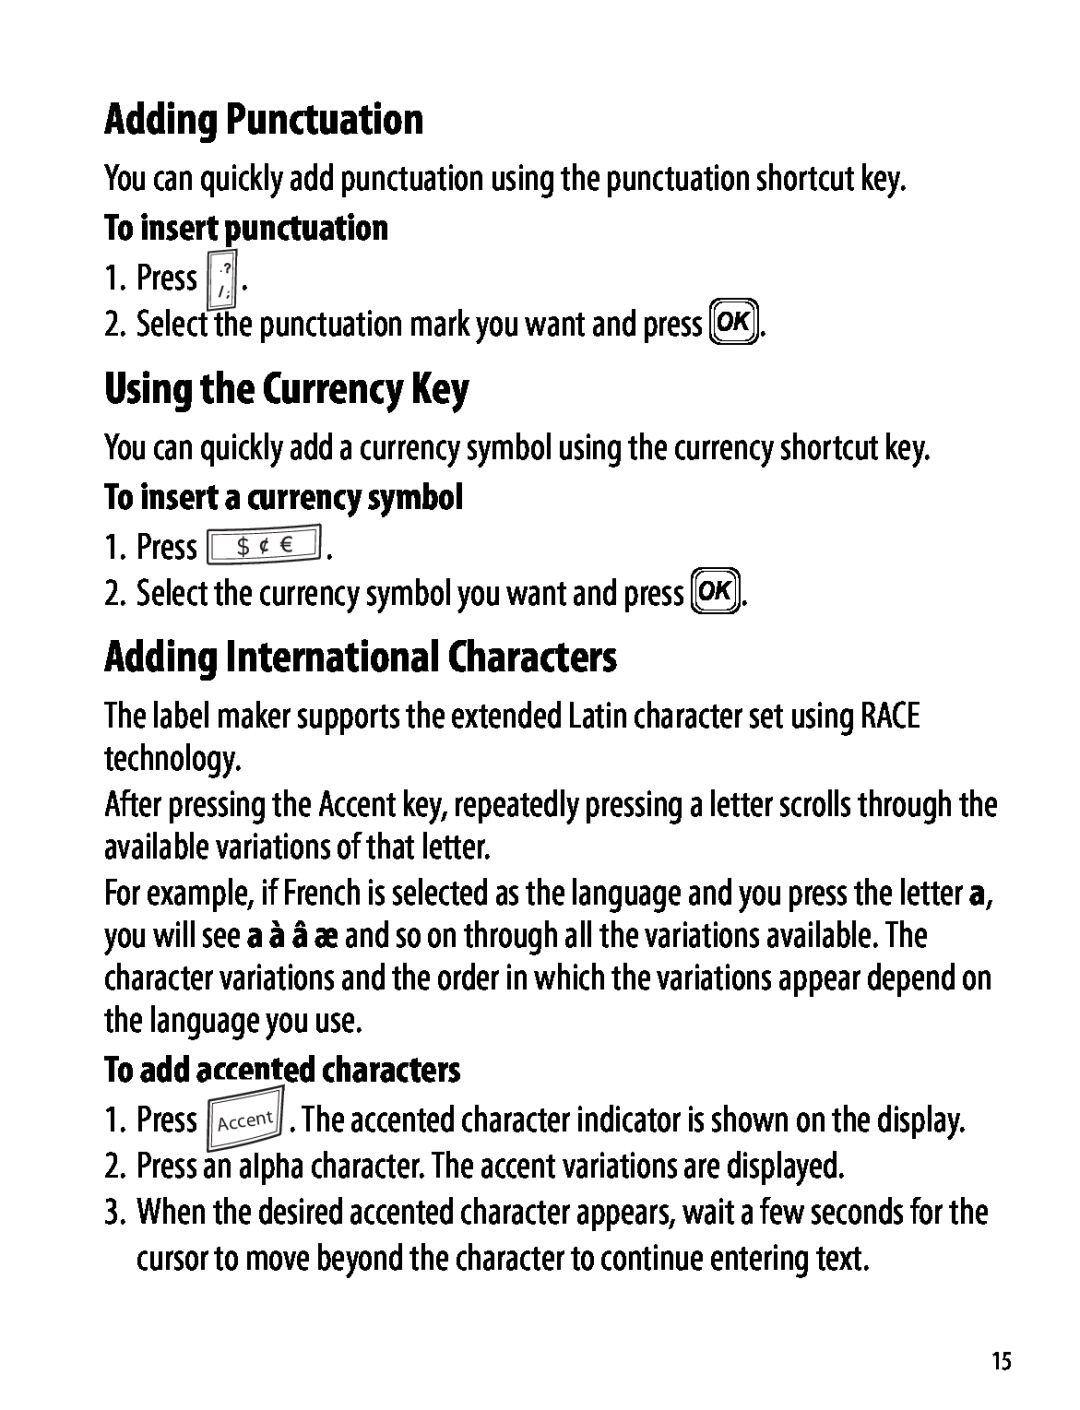 Dymo 220P manual Adding Punctuation, Using the Currency Key, Adding International Characters, To insert punctuation 